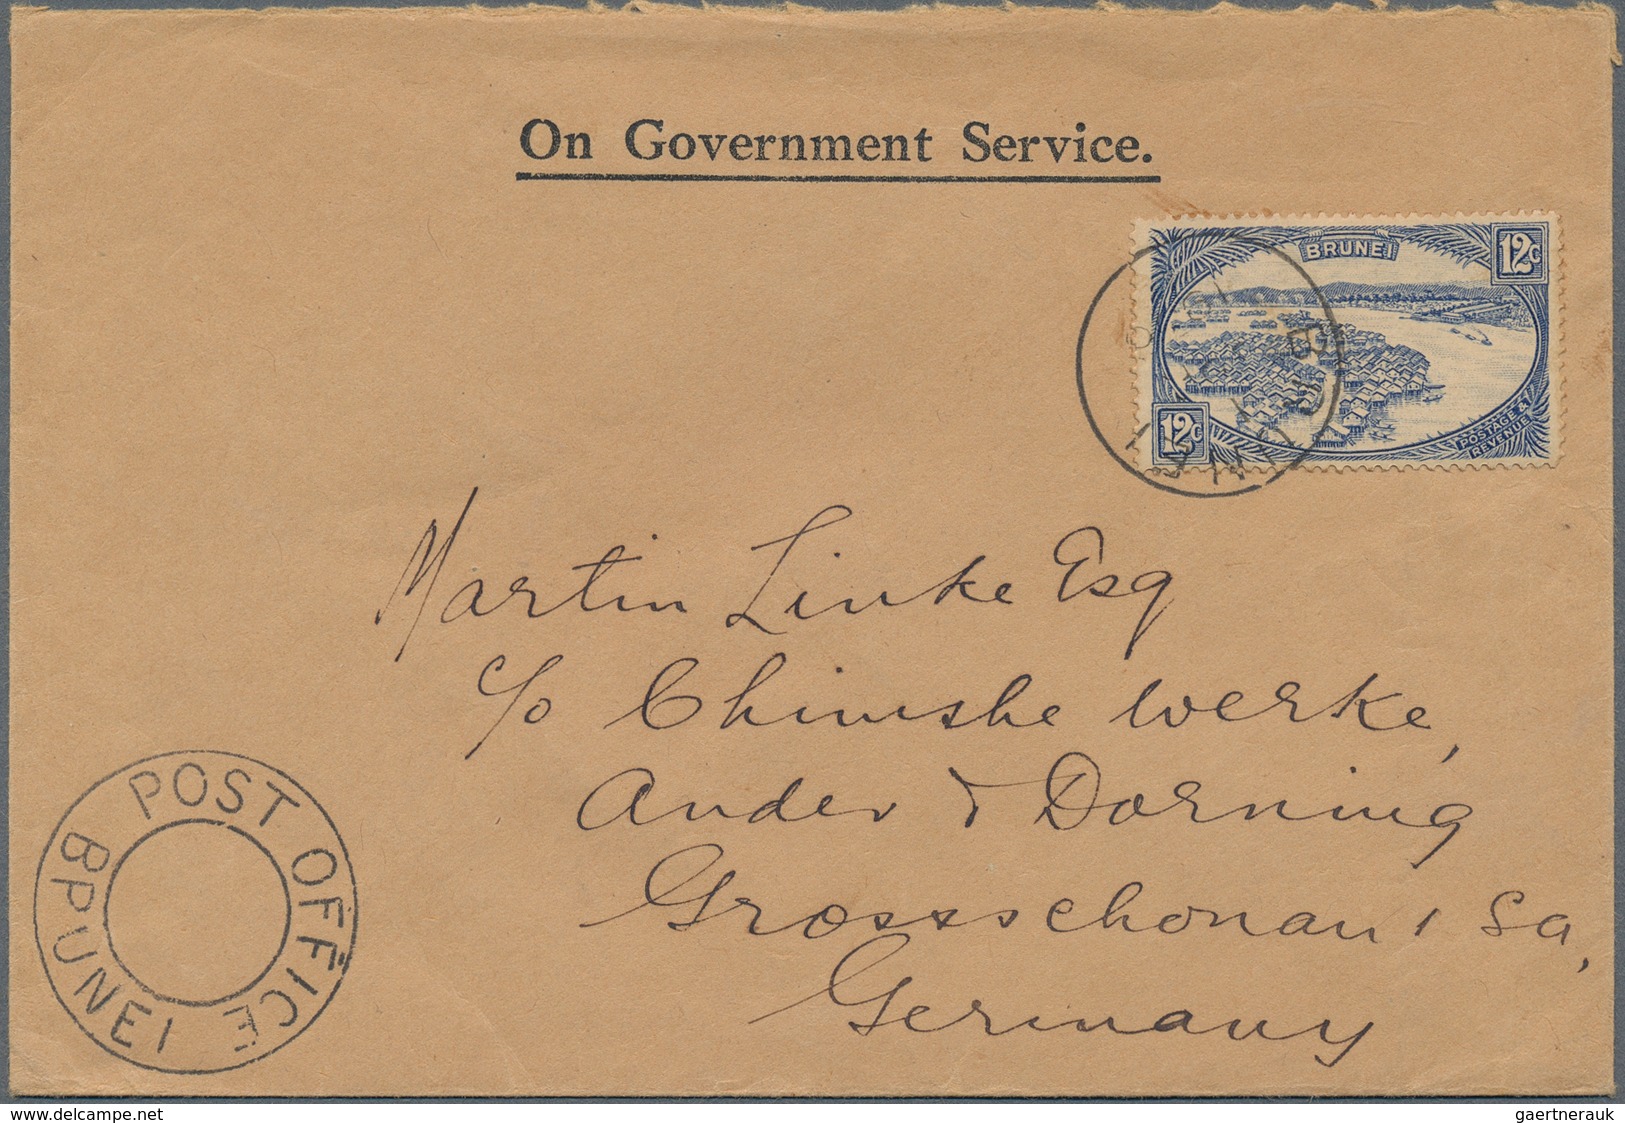 Brunei: 1936, 12 C Blue, Single Franking On "On Government Service" Cover With Cds BRUNEI, (...)1936 - Brunei (1984-...)